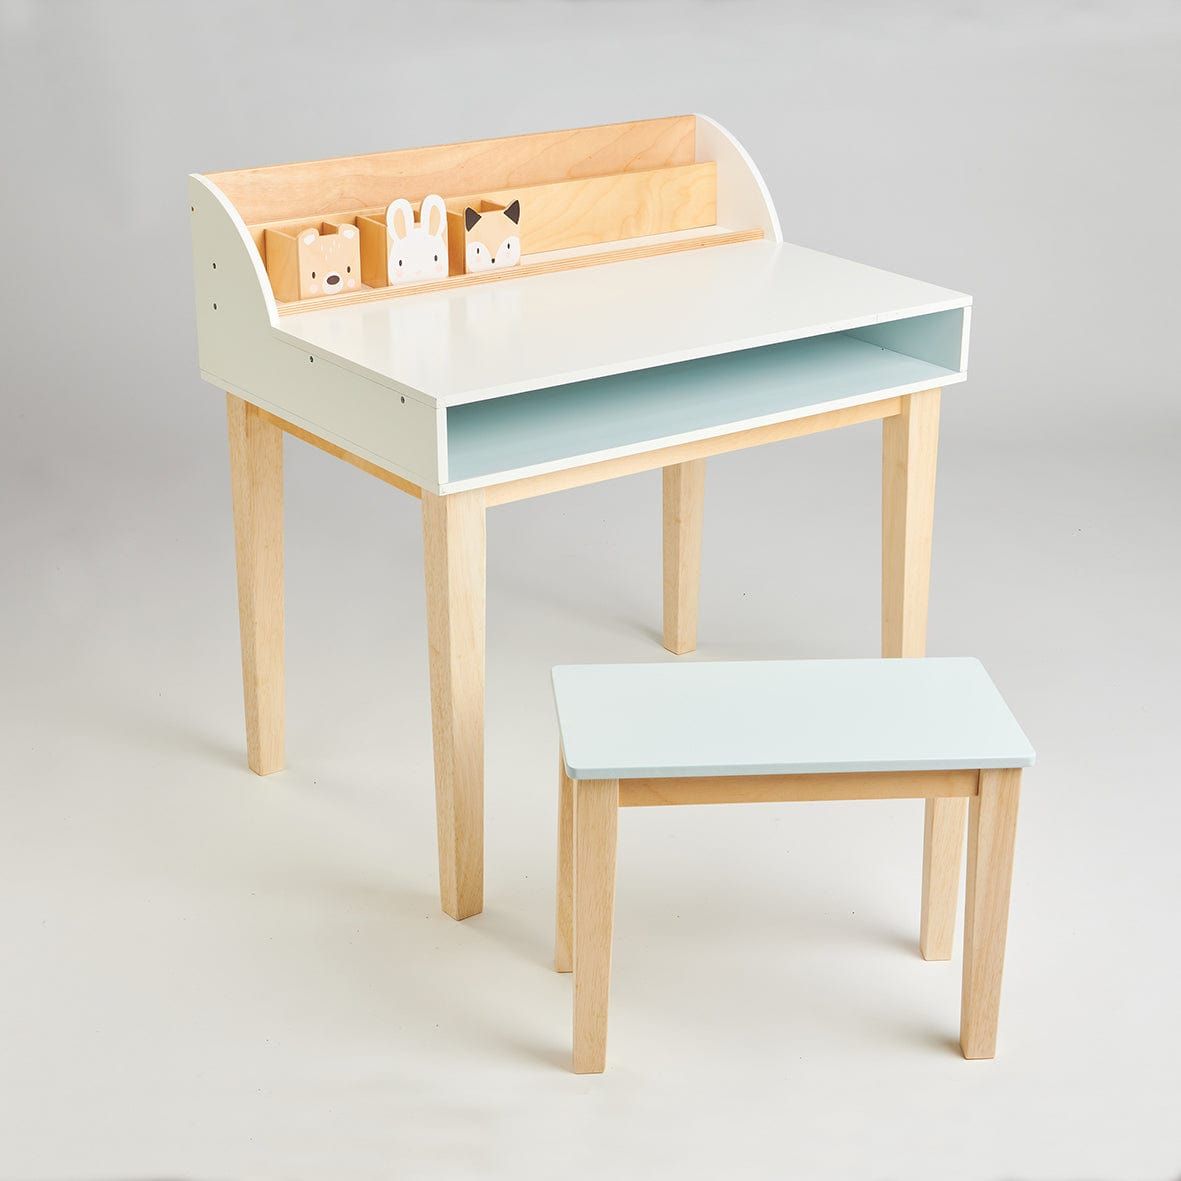 Tender Leaf Wooden Desk and Chair